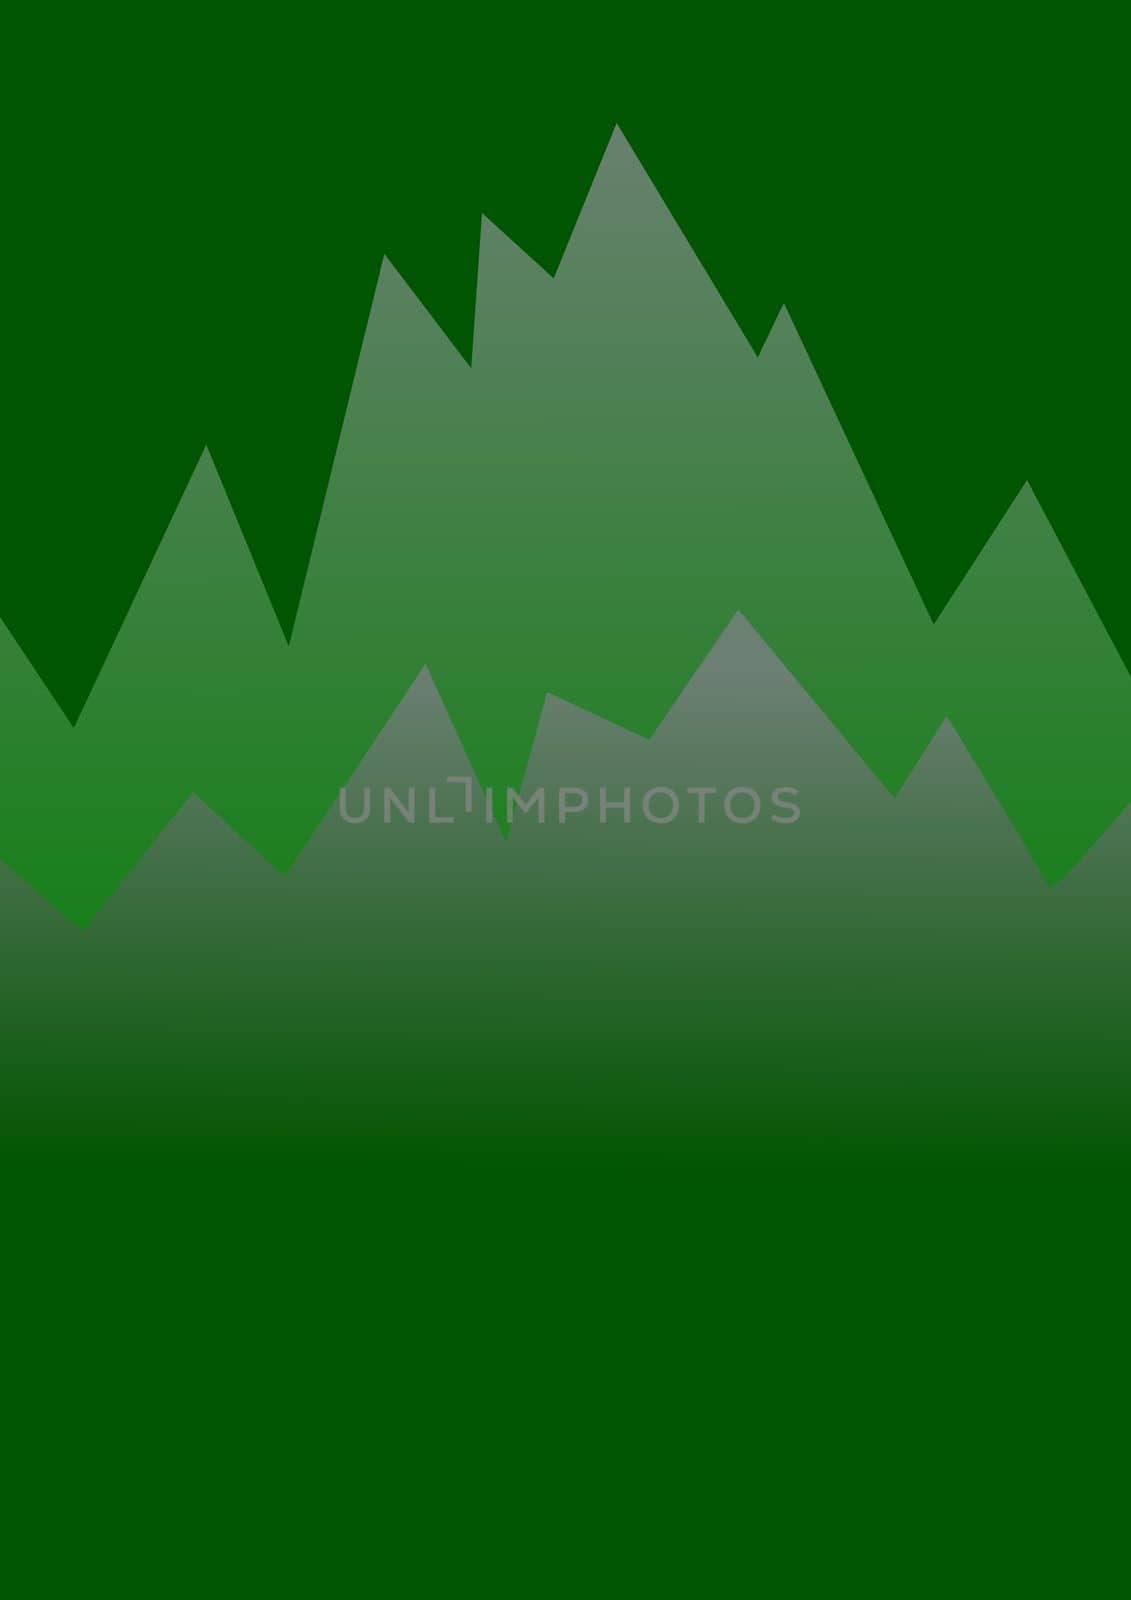 Abstract illustration of mountains rising in the distance in green colors.